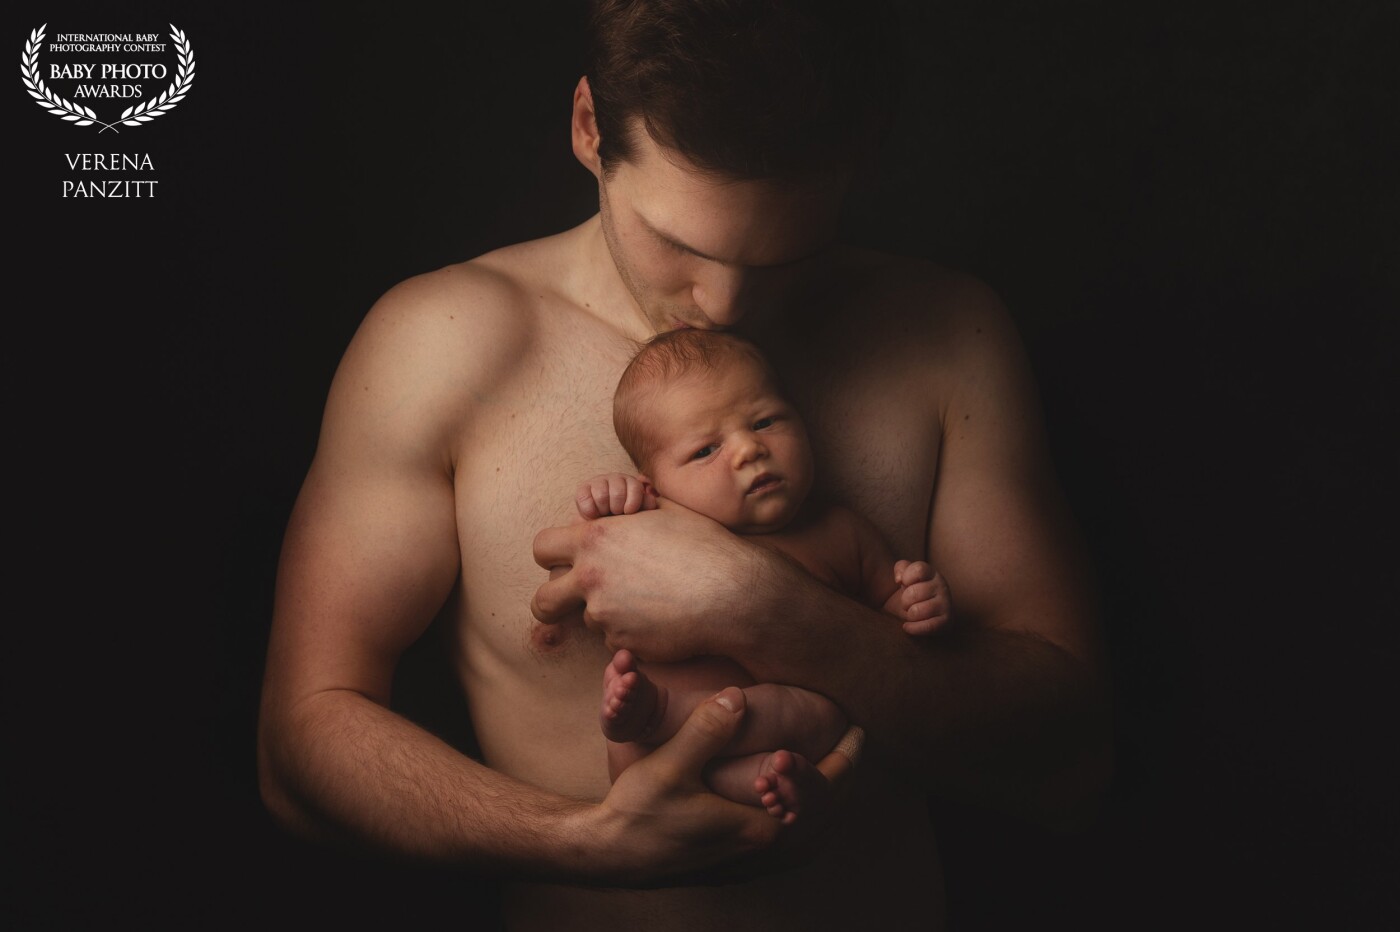 Bonding is known as the skin to skin contact between baby and parents after birth and that follows up through the first few weeks after childbirth. As being a midwife  as well as a photographer I love to photograph the pureness in this moment, where naked baby lay peacefully on his dad‘s skin in order to show this special relationship created between a newborn with its parents. Unconditional and pure love.